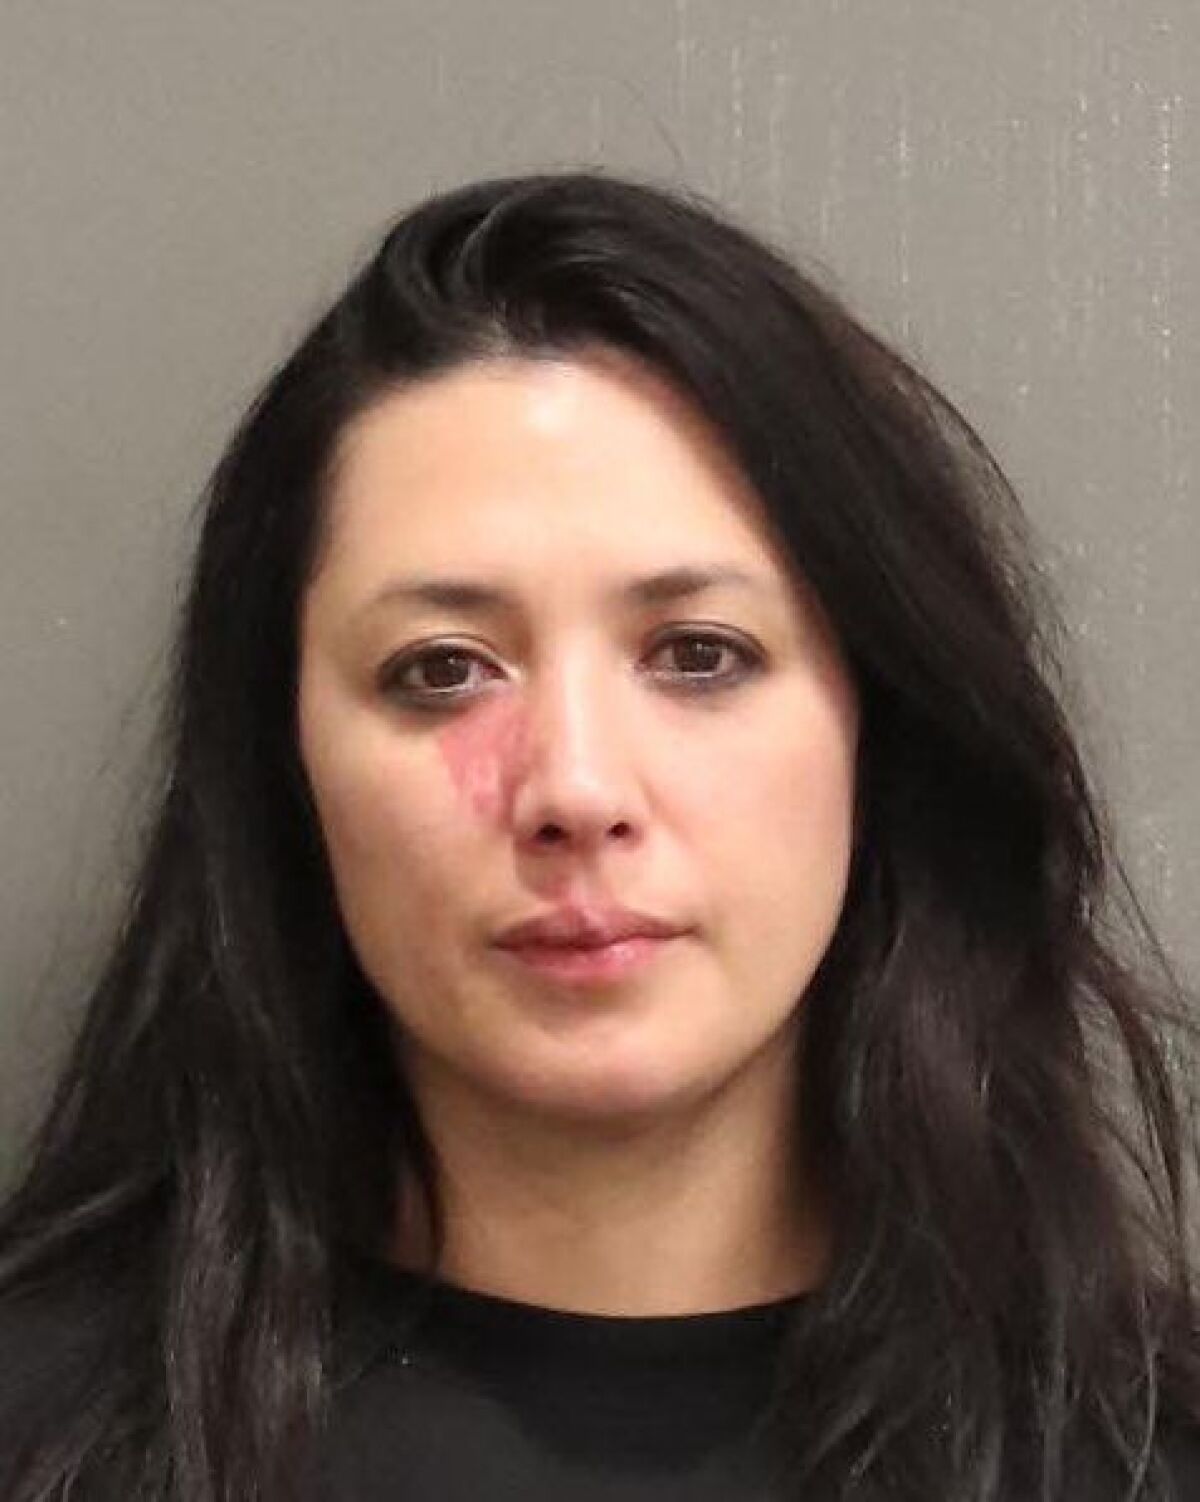 A mug shot of a woman with long hair showing redness below her right eye